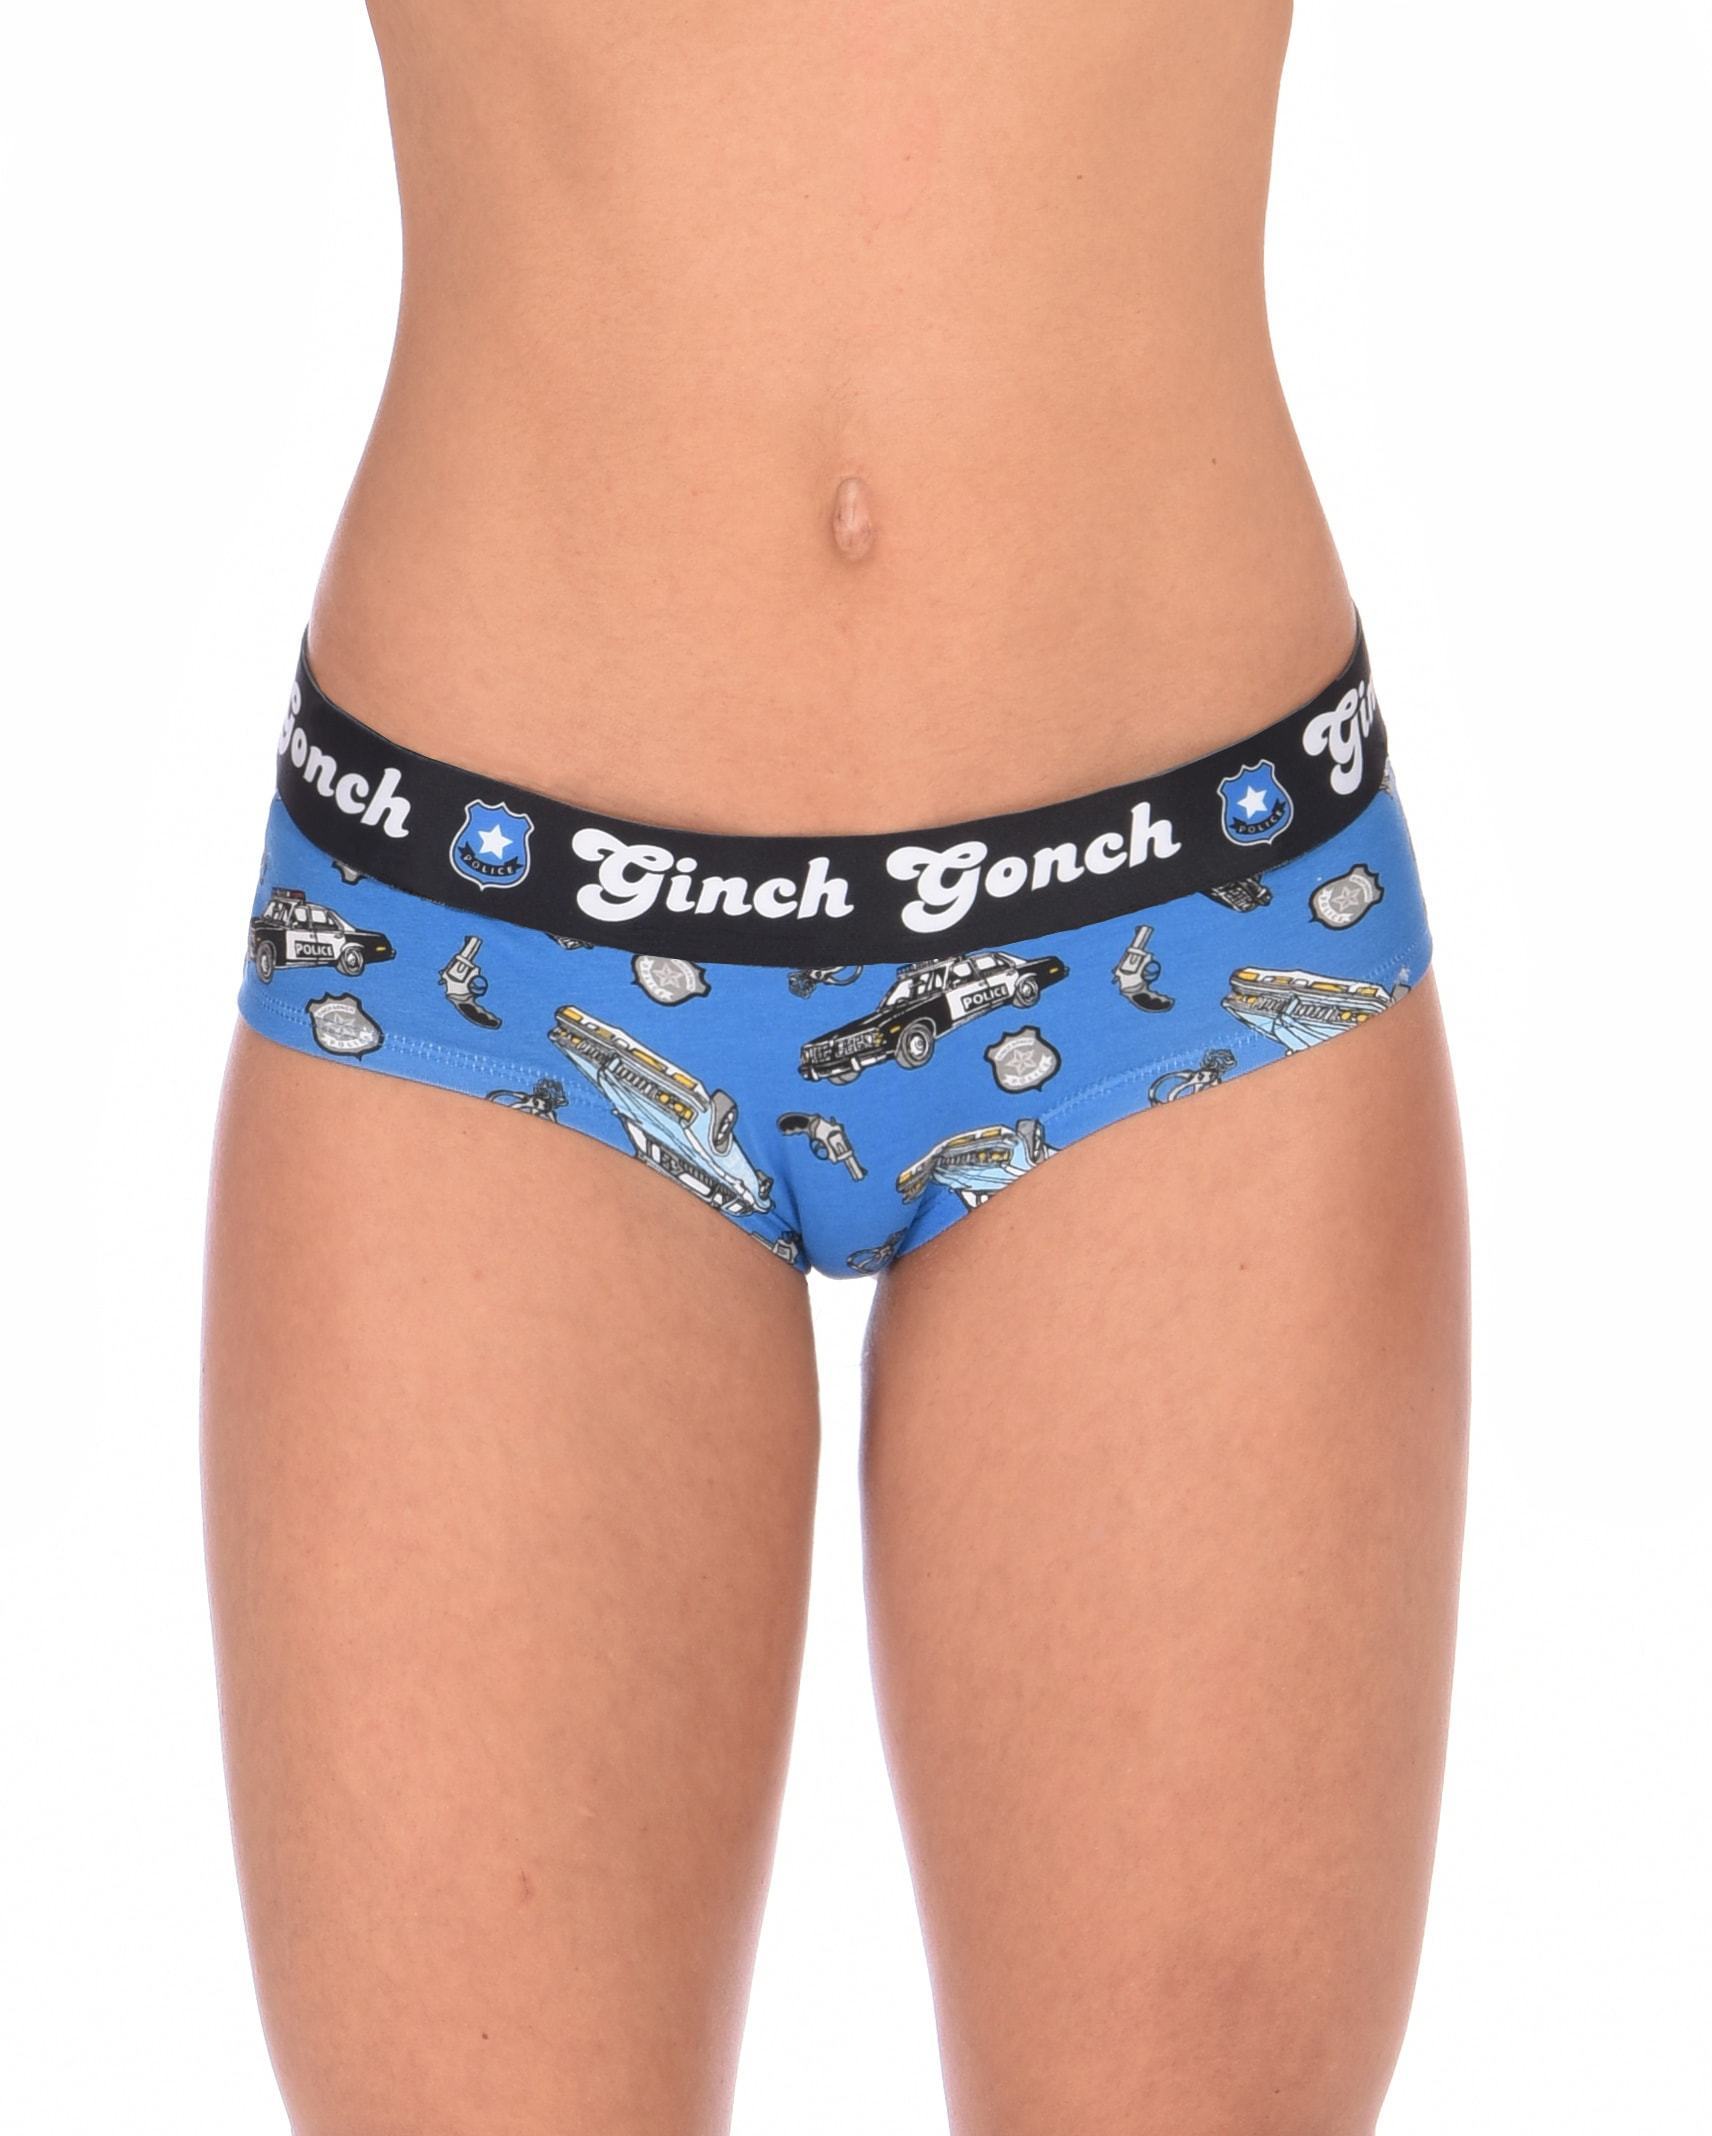 Ginch Gonch GG Patrol boy cut Brief women's underwear blue fabric with cop cars, badges, hand cuffs, and guns. Black trim and black printed waistband front. 